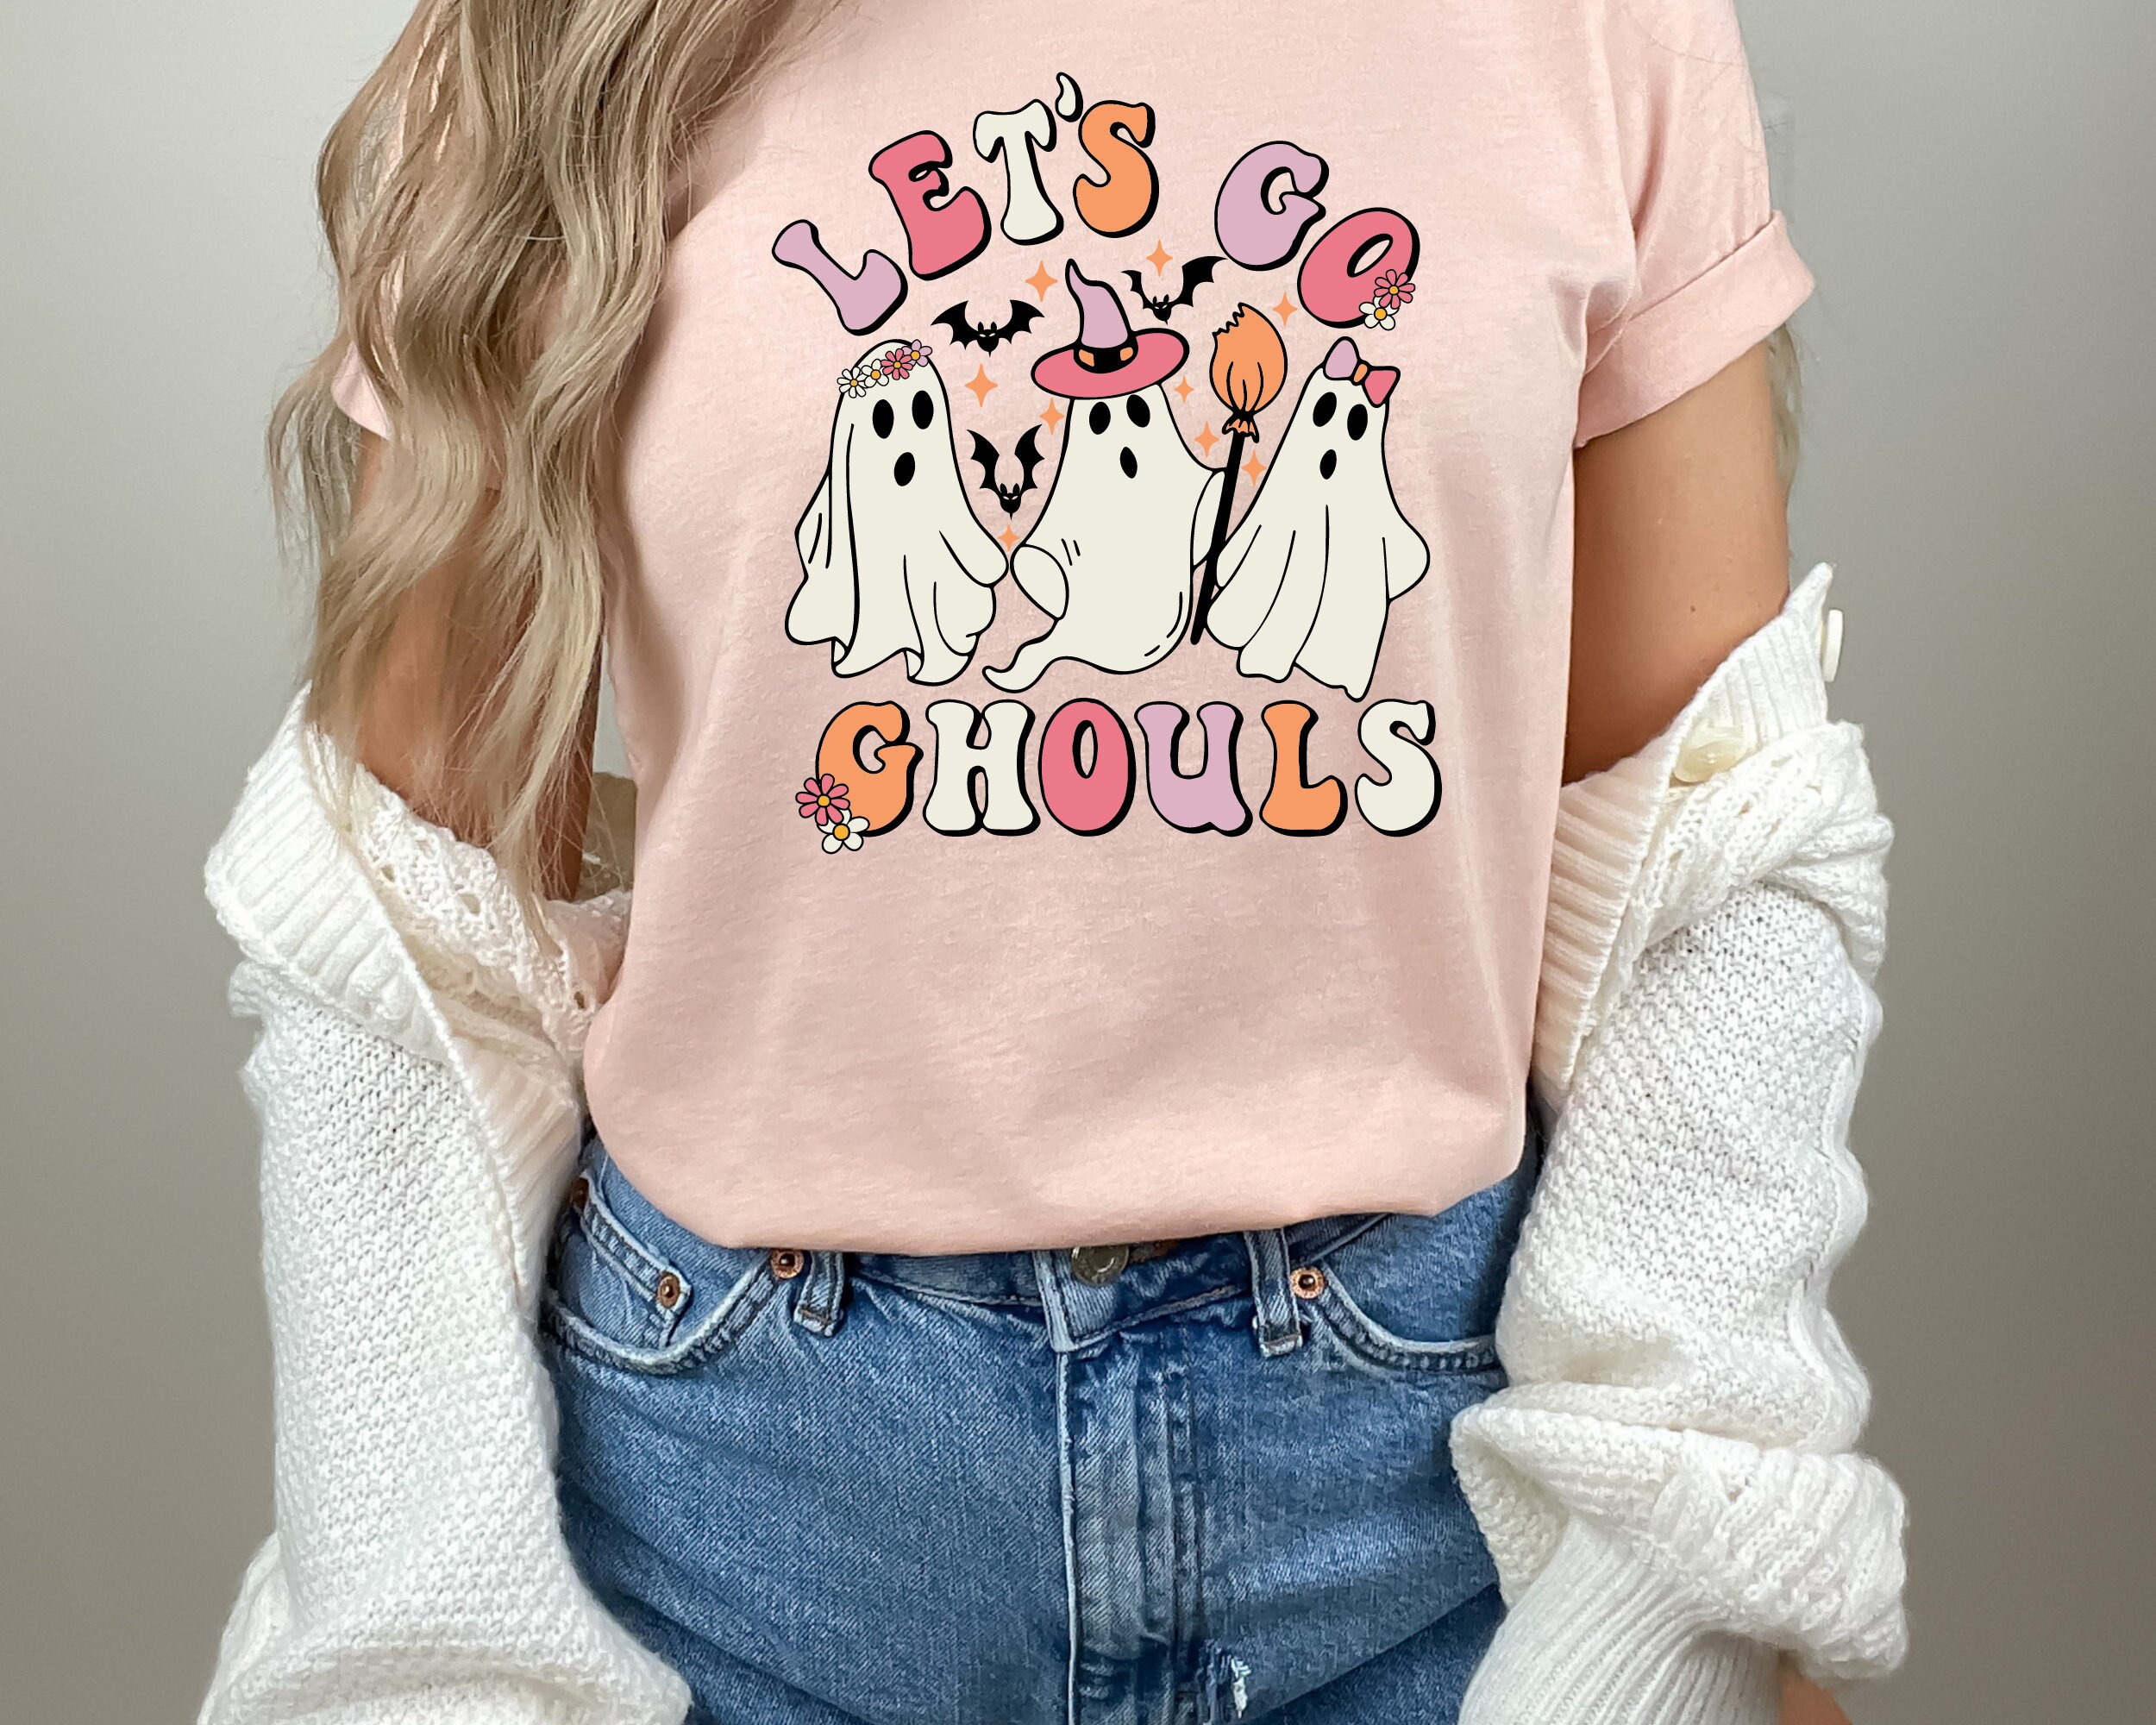 Lets Go Ghouls Bluey Halloween Shirt For Adult Kids, Bluey Hocus